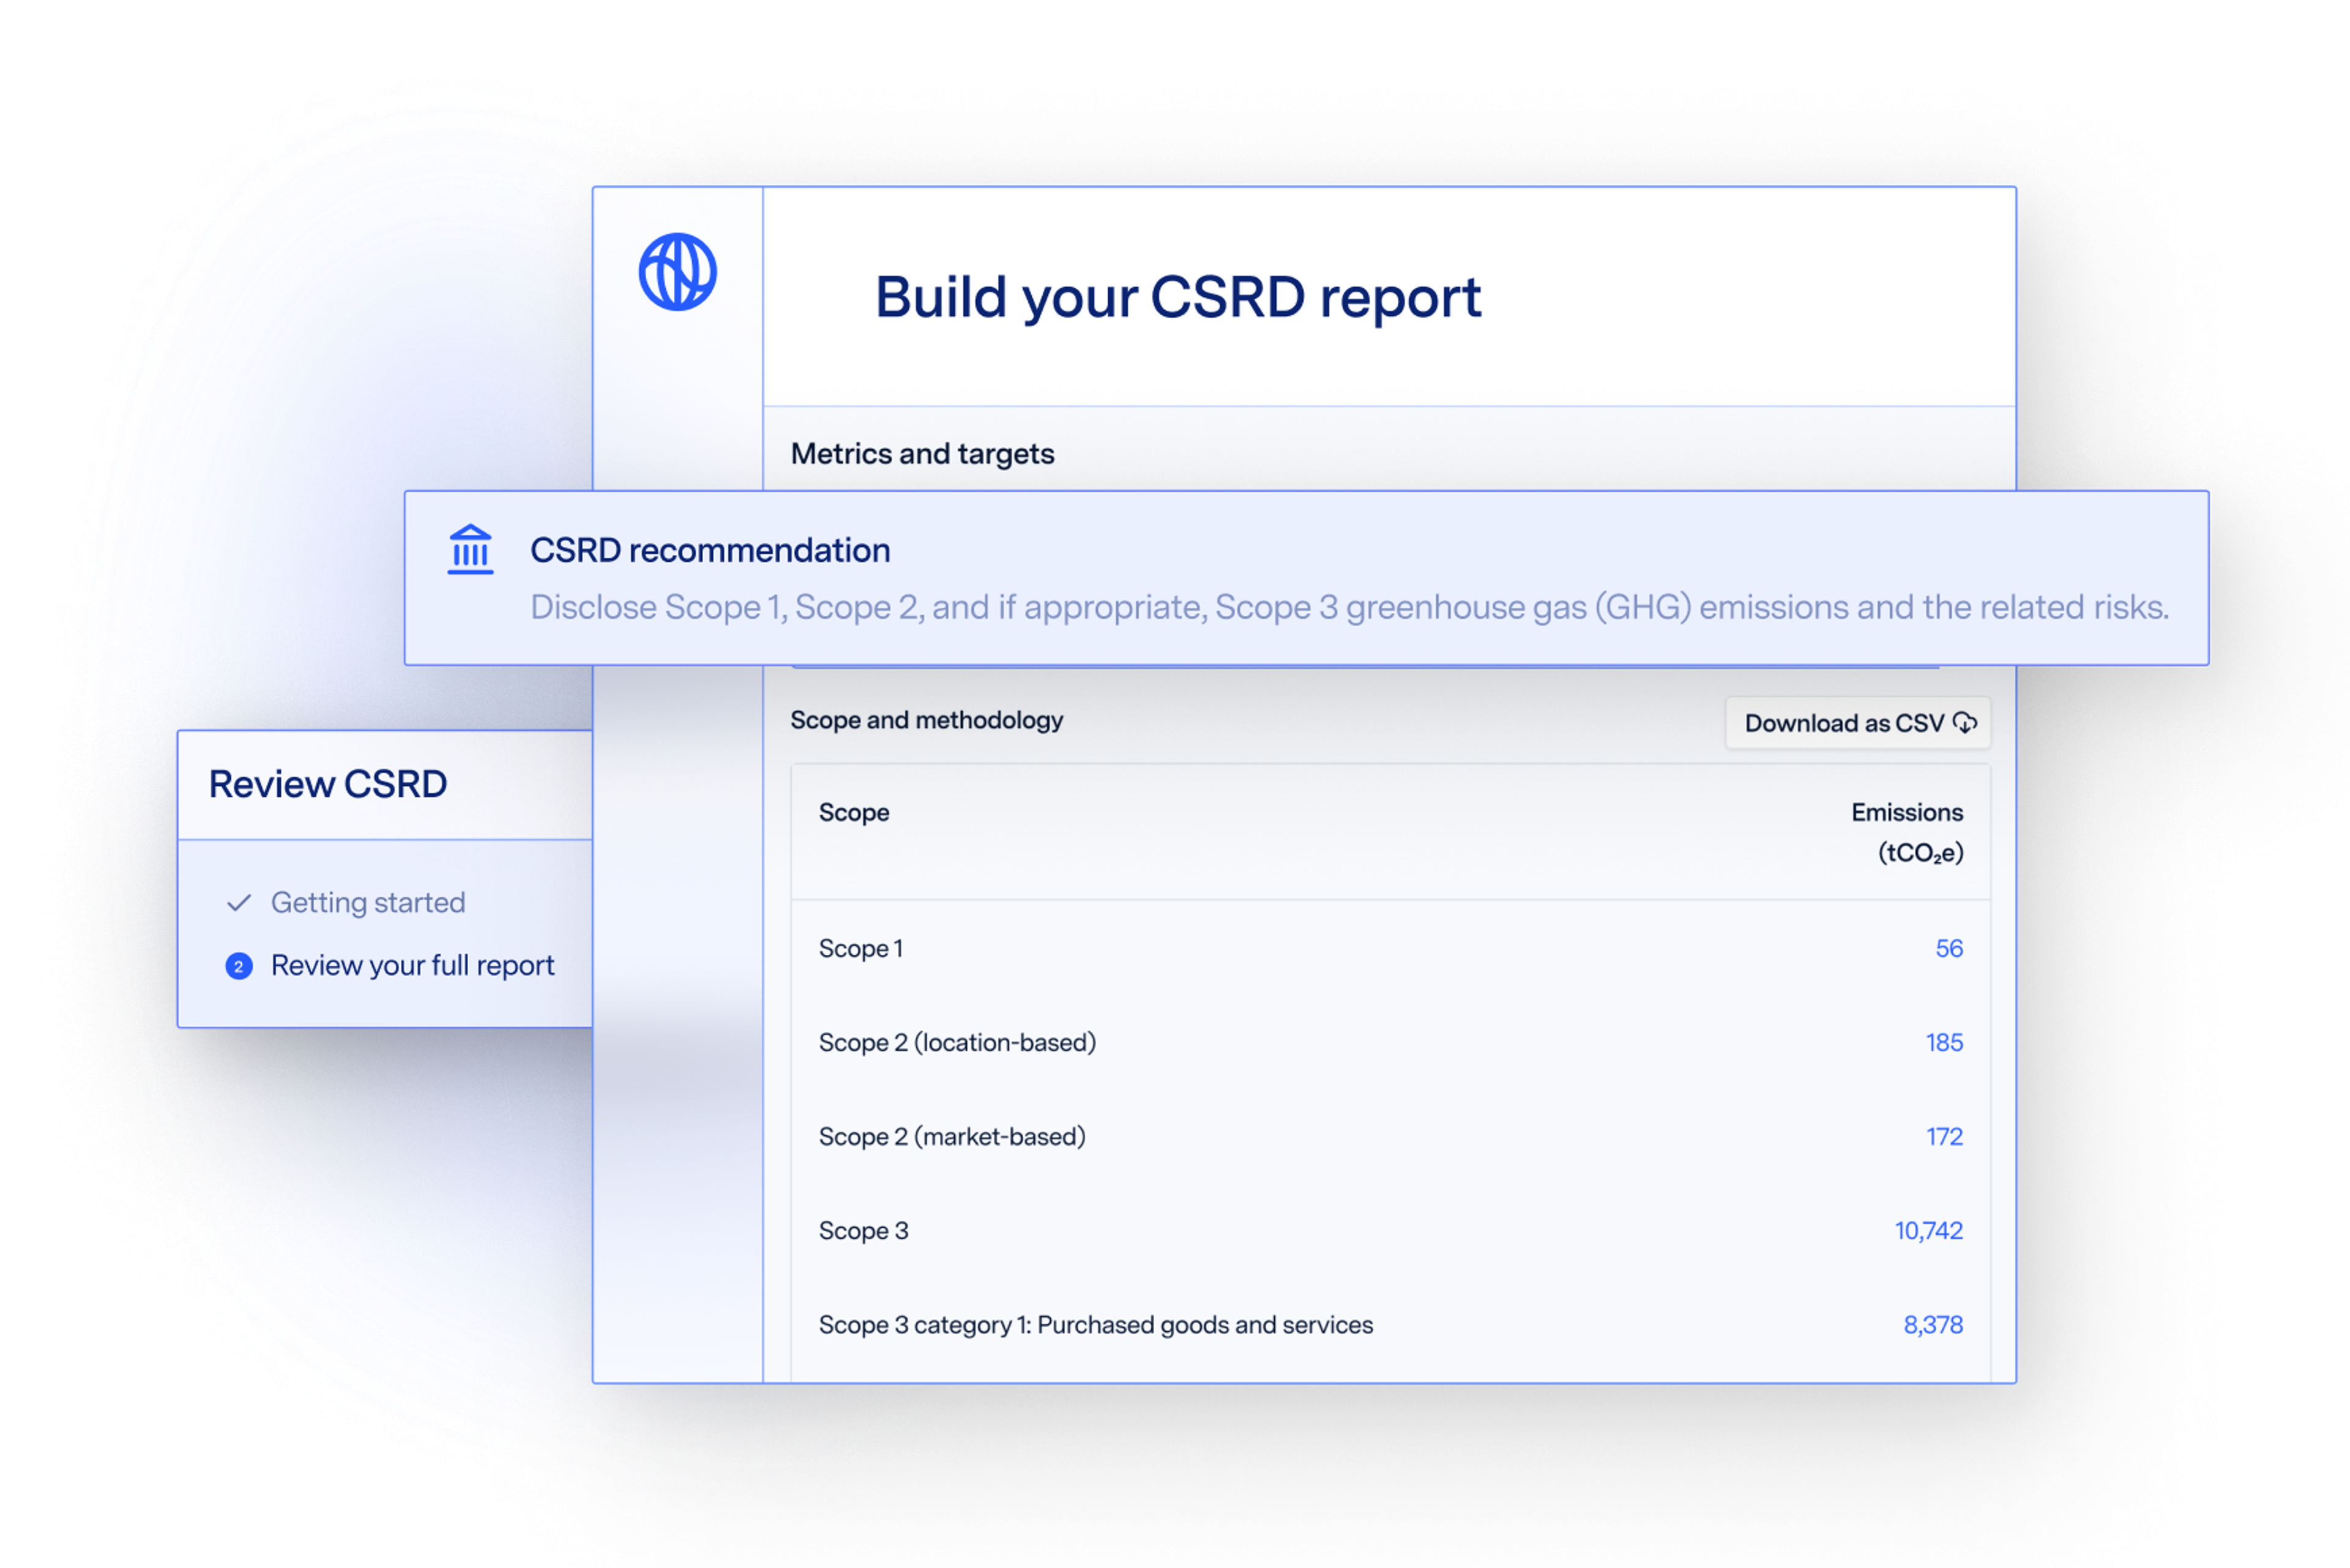 Watershed enables companies to quickly build CSRD reports